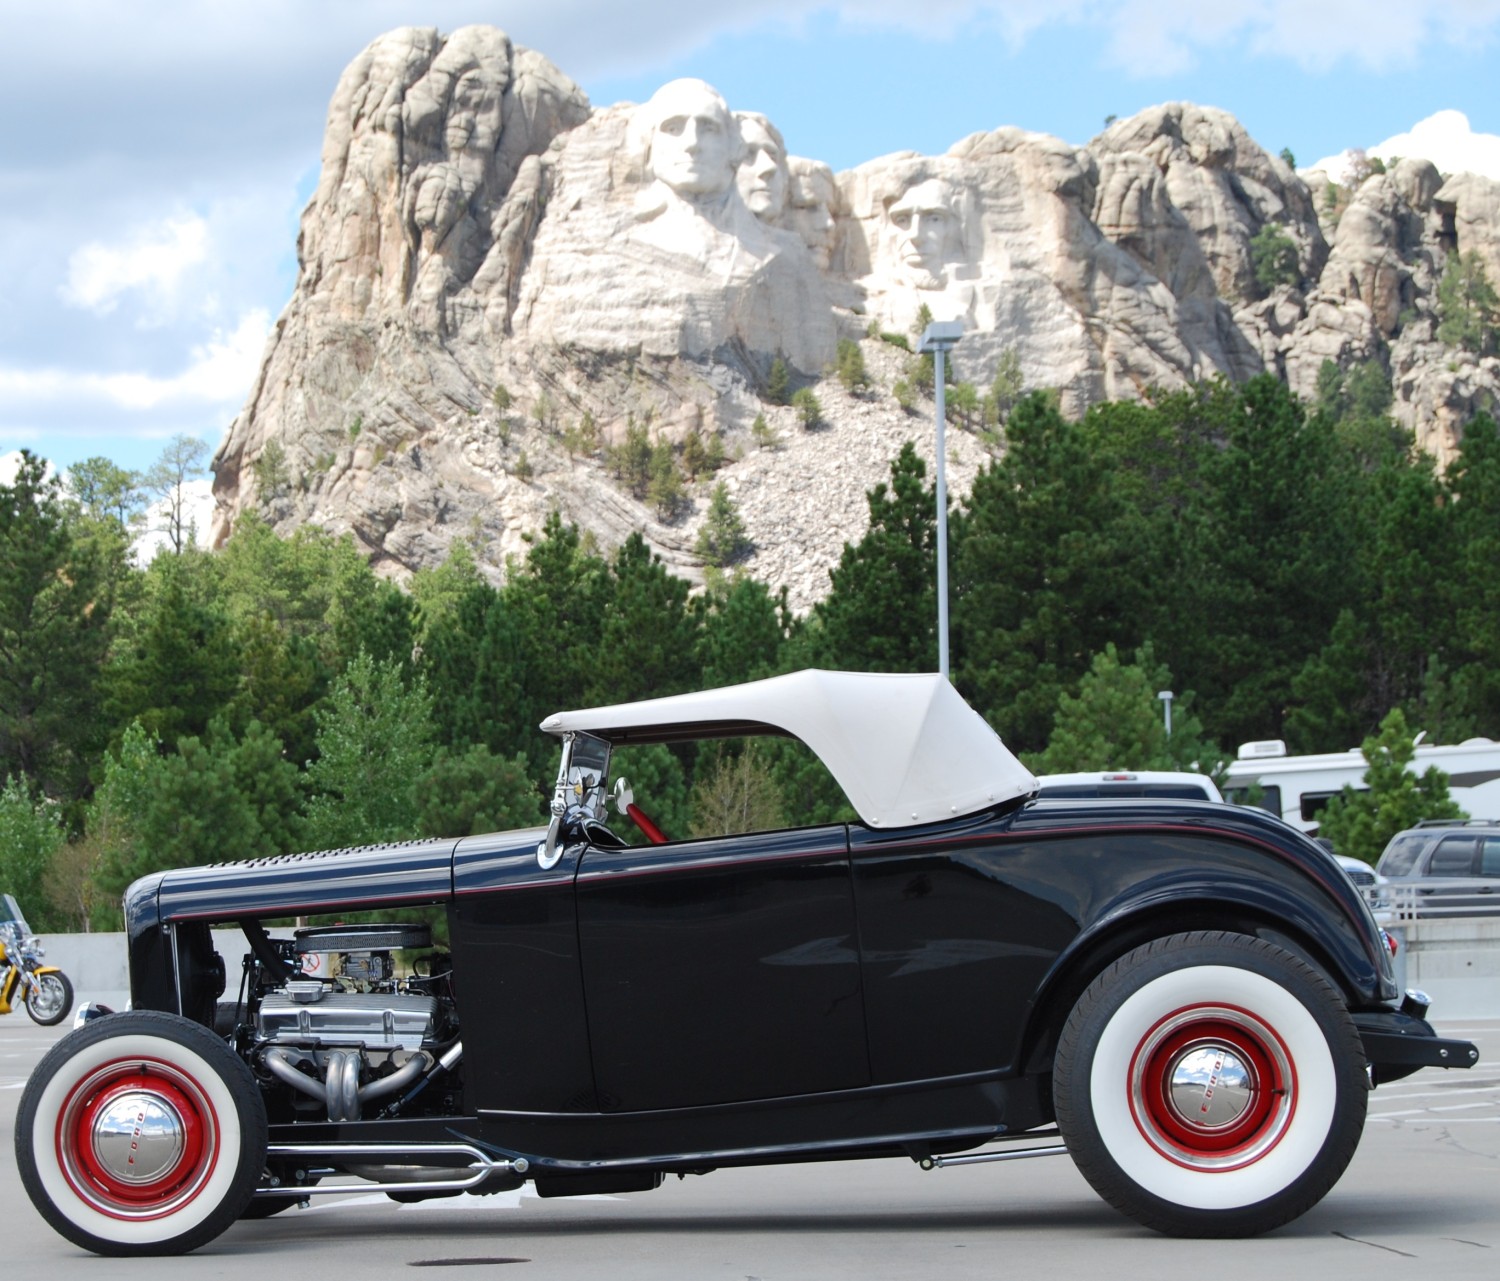 1932 Ford Roadster - USA32 - Shannons Club